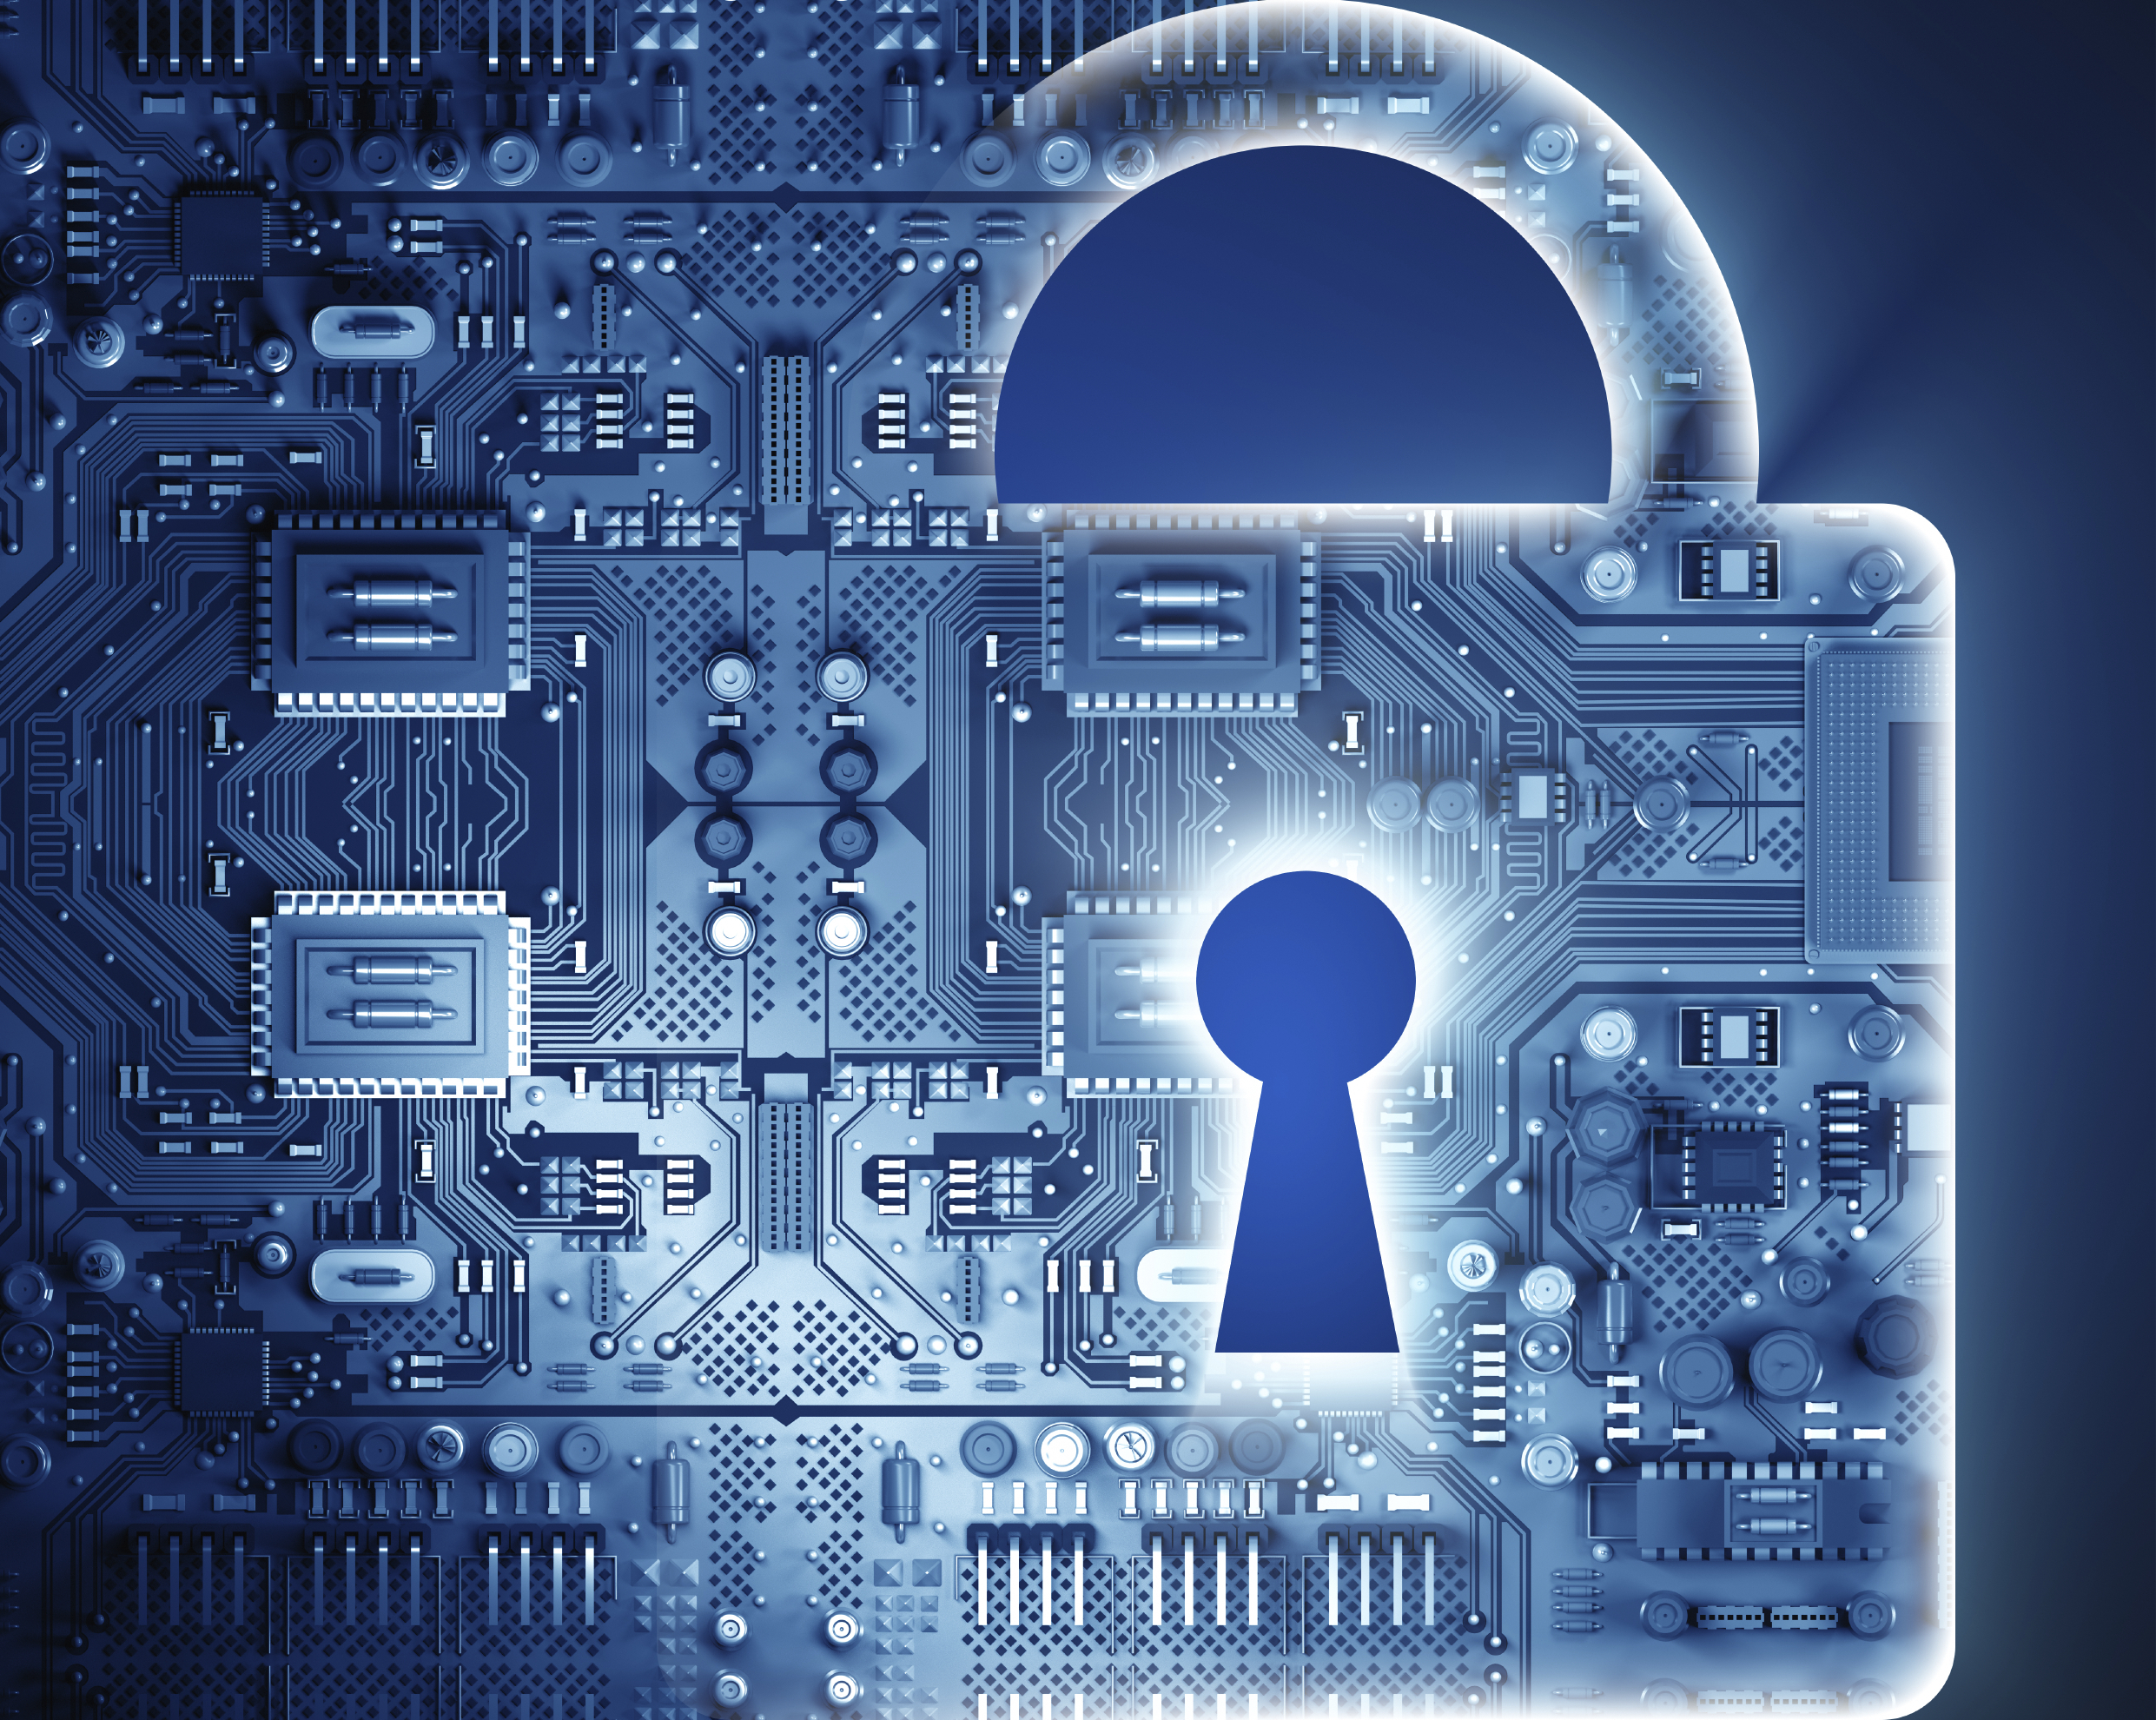 Technology Today - Why Private IT Security Services are a Must ...